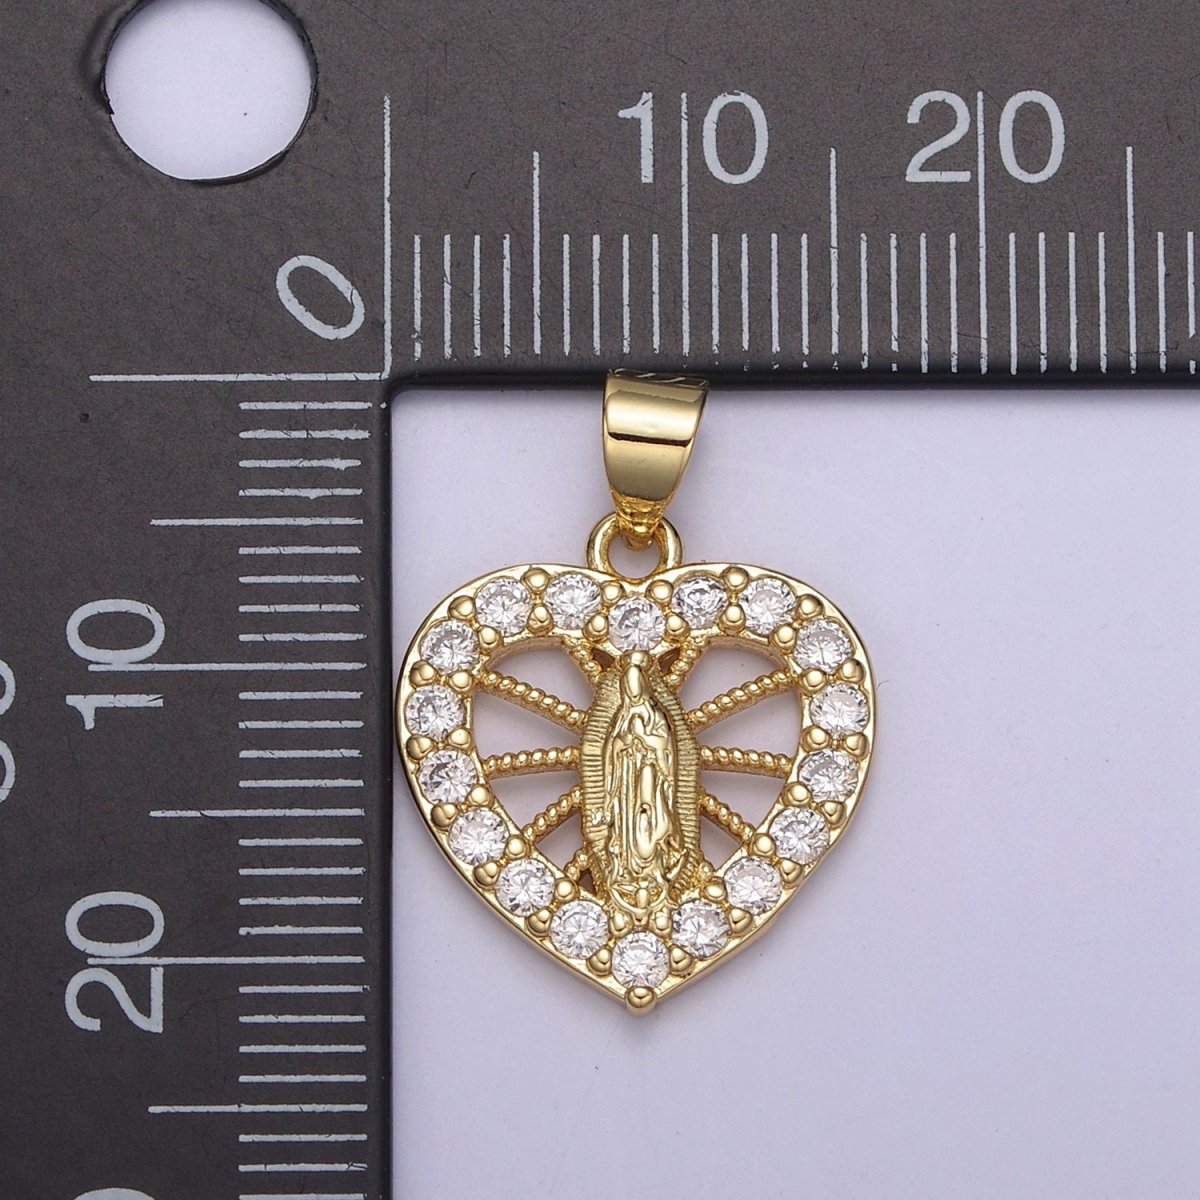 Dainty Heart Pendant with Lady Guadalupe Charm For Religious Jewelry Making H-725 - DLUXCA